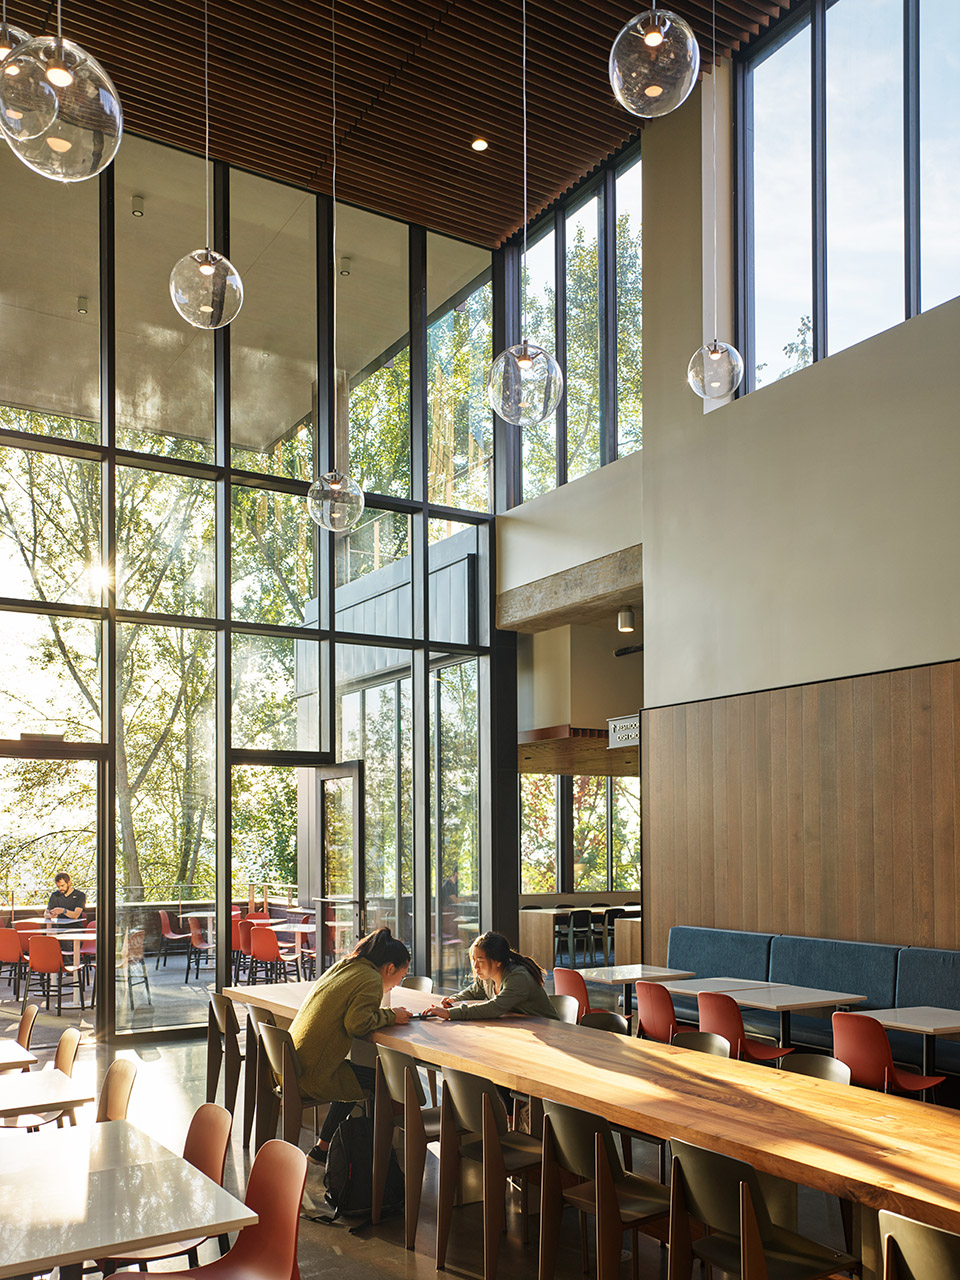 016 Center Table At North Campus Of University Of Washington By Graham Baba Architects 